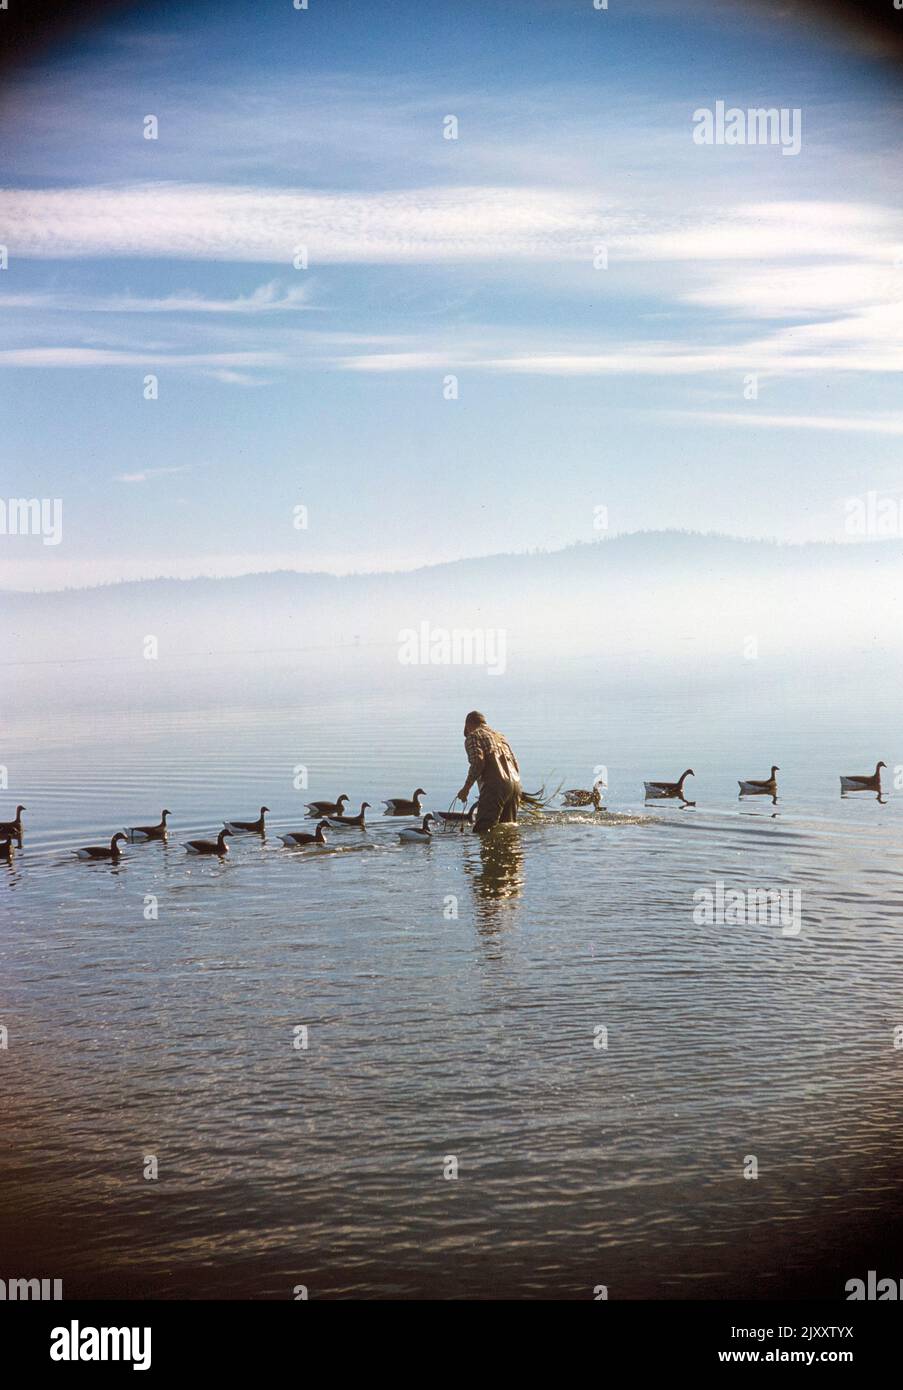 Rear View of Man standing in water with Duck Decoys, California, USA, Toni Frissell Collection, November 1959 Stock Photo